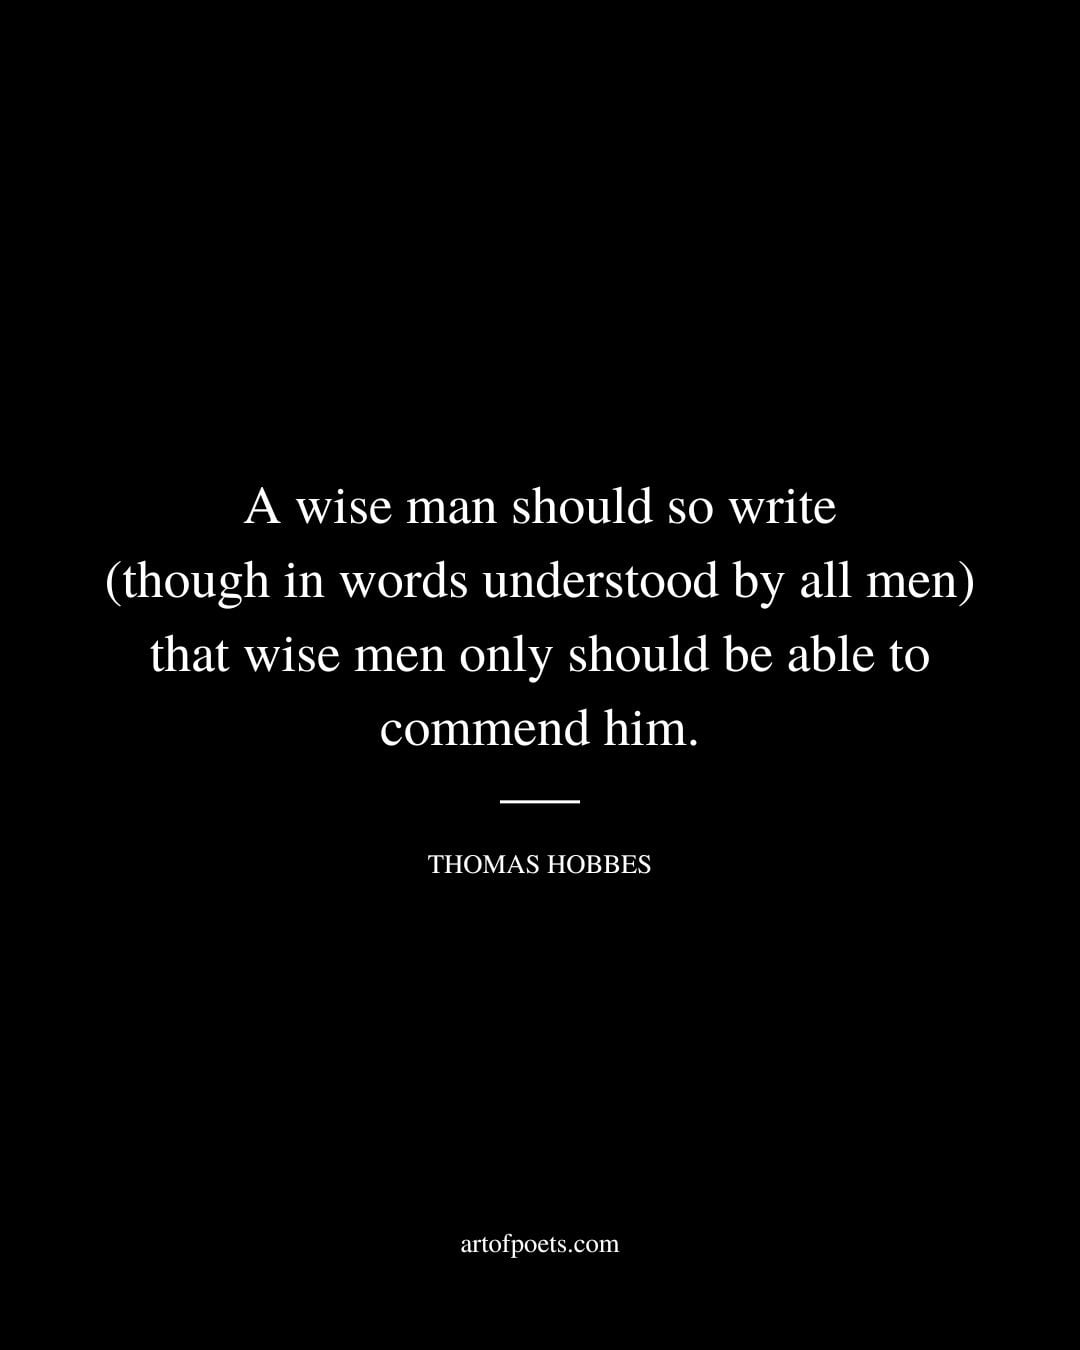 A wise man should so write though in words understood by all men that wise men only should be able to commend him